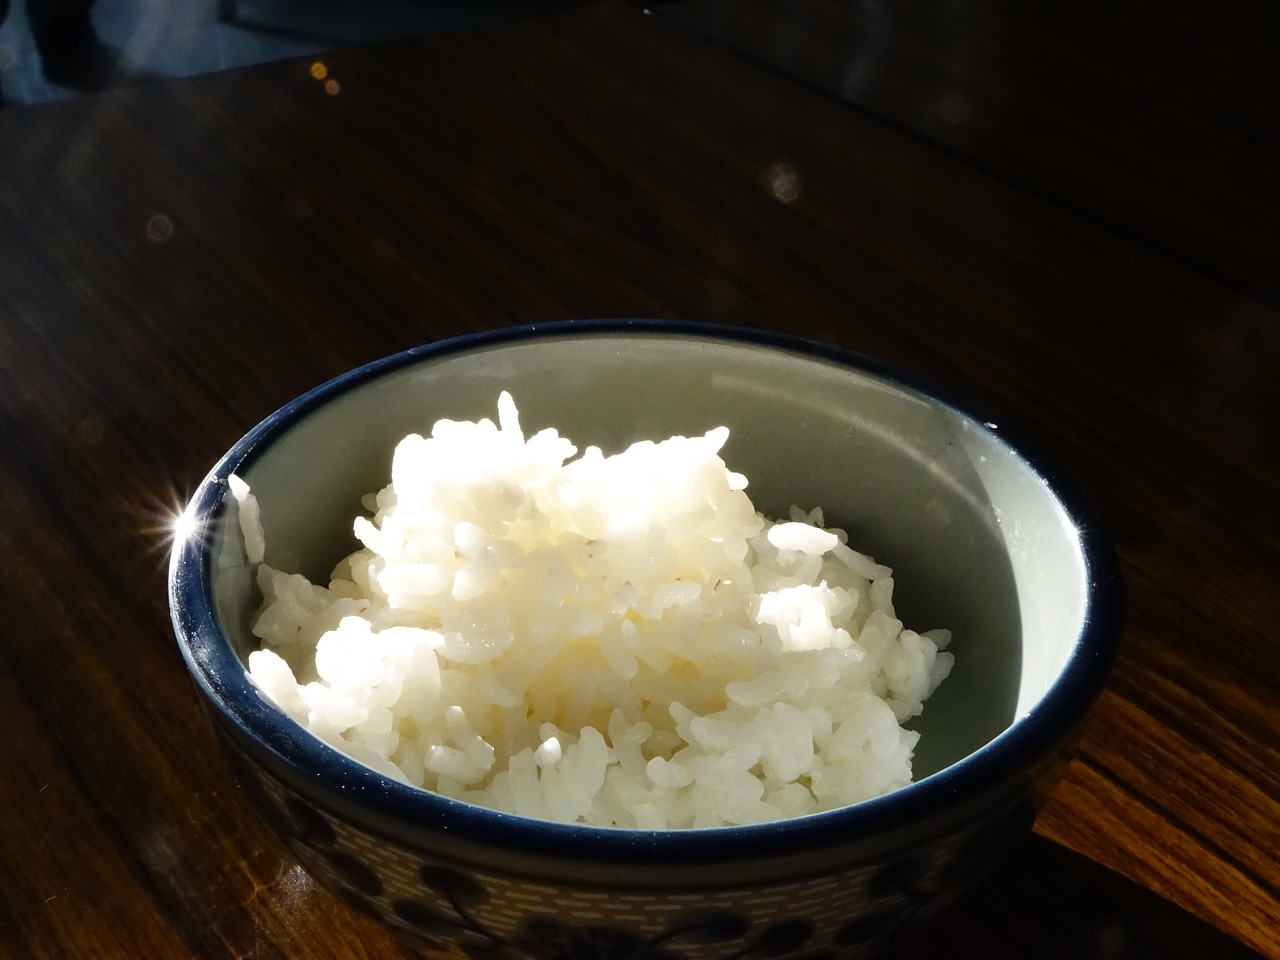 Cooked Rice is Safe and Healthy For Your Dog